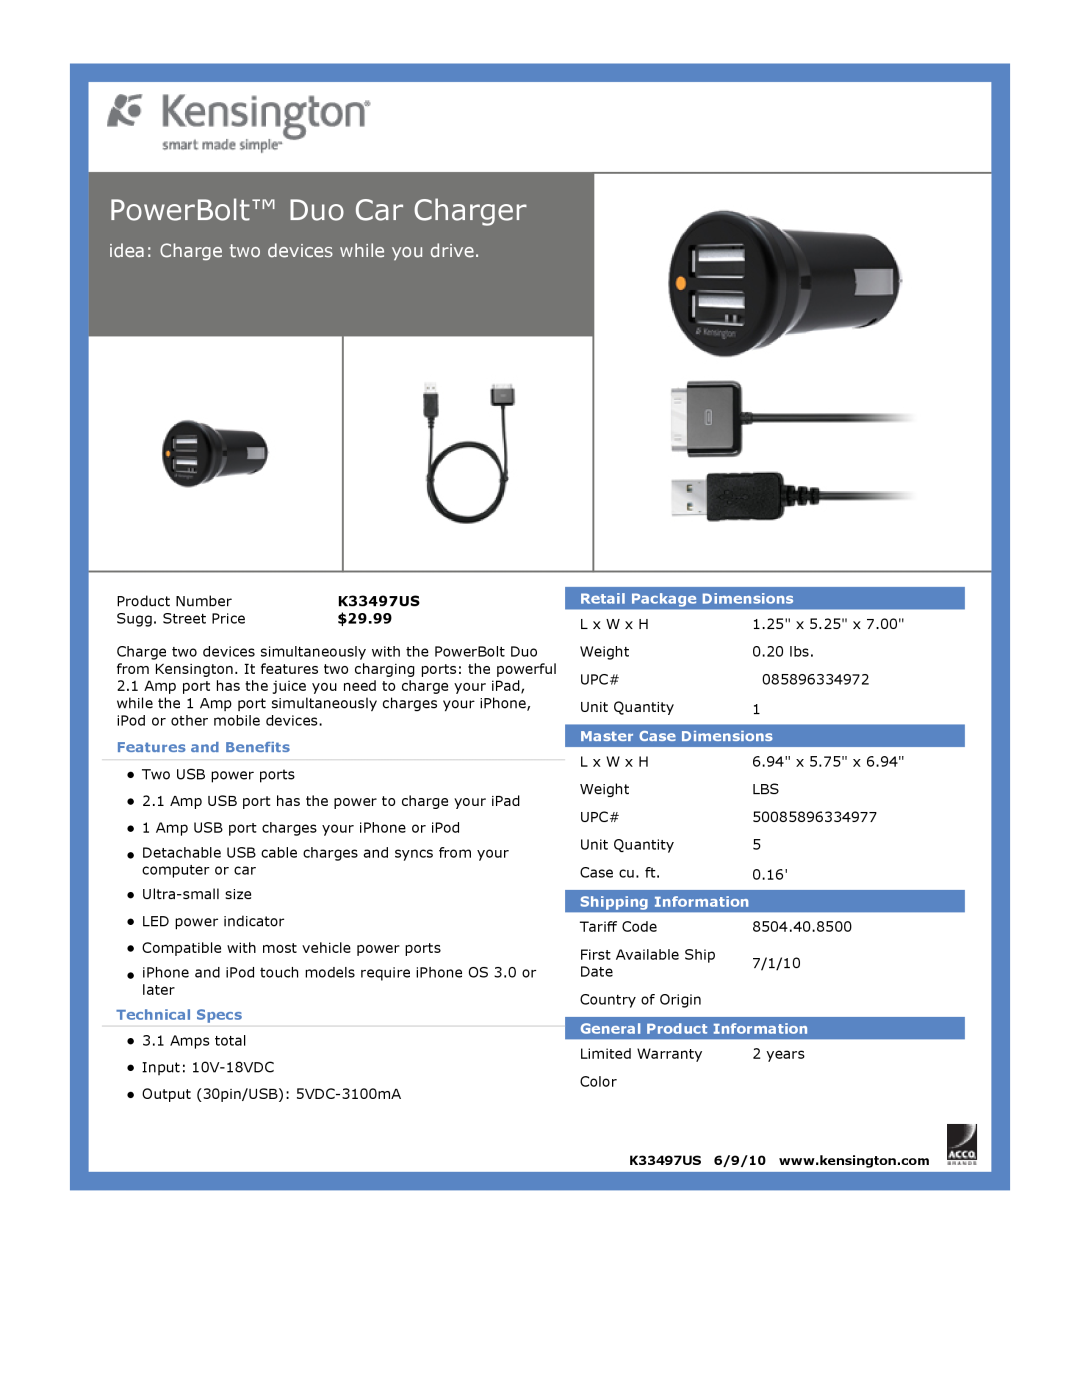 Kensington EU64325 PowerBolt Duo Car Charger, idea: Charge two devices while you drive, $29.99, Features and Benefits 